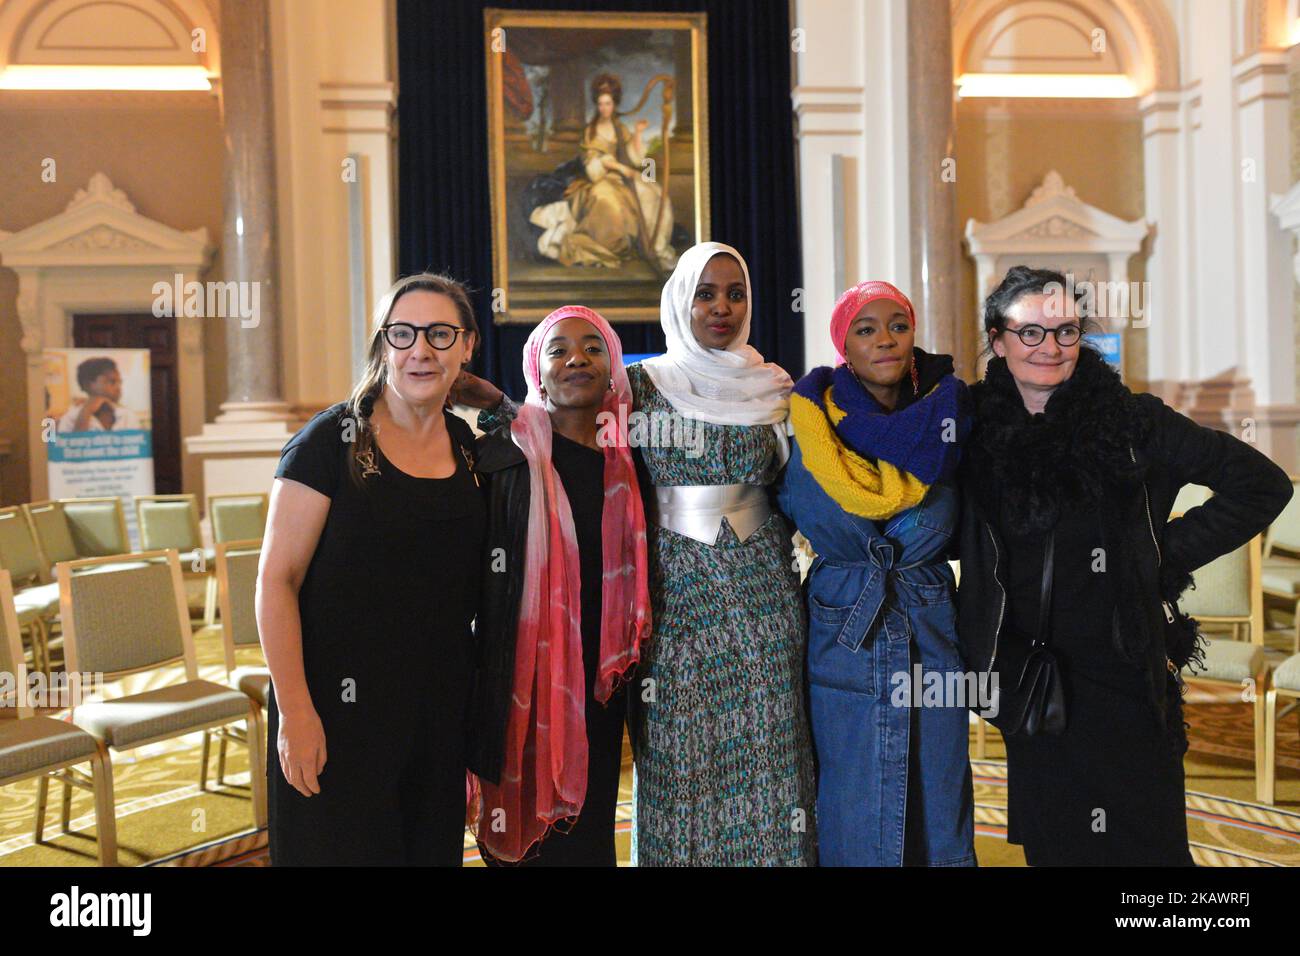 (Left-Right) Pauline McLynn, Aja Naomi King, Ifrah Ahmed, Martha Canga Antonio and Mary McGuckian, during an on set photo call, which has just commenced in Dublin for the Pembridge Pictures and Umedia production of ‘A Girl from Mogadishu’ – a true story based on the testimony of Ifrah Ahmed. Born into a refugee camp in war-torn Somalia, Ifrah was trafficked to Ireland as a teenager. Recounting her traumatic childhood experiences of Female Genital Mutilation / Cutting (FGM/C) when applying for refugee status, she was again traumatized and decided to devote her life to the eradication of the pr Stock Photo